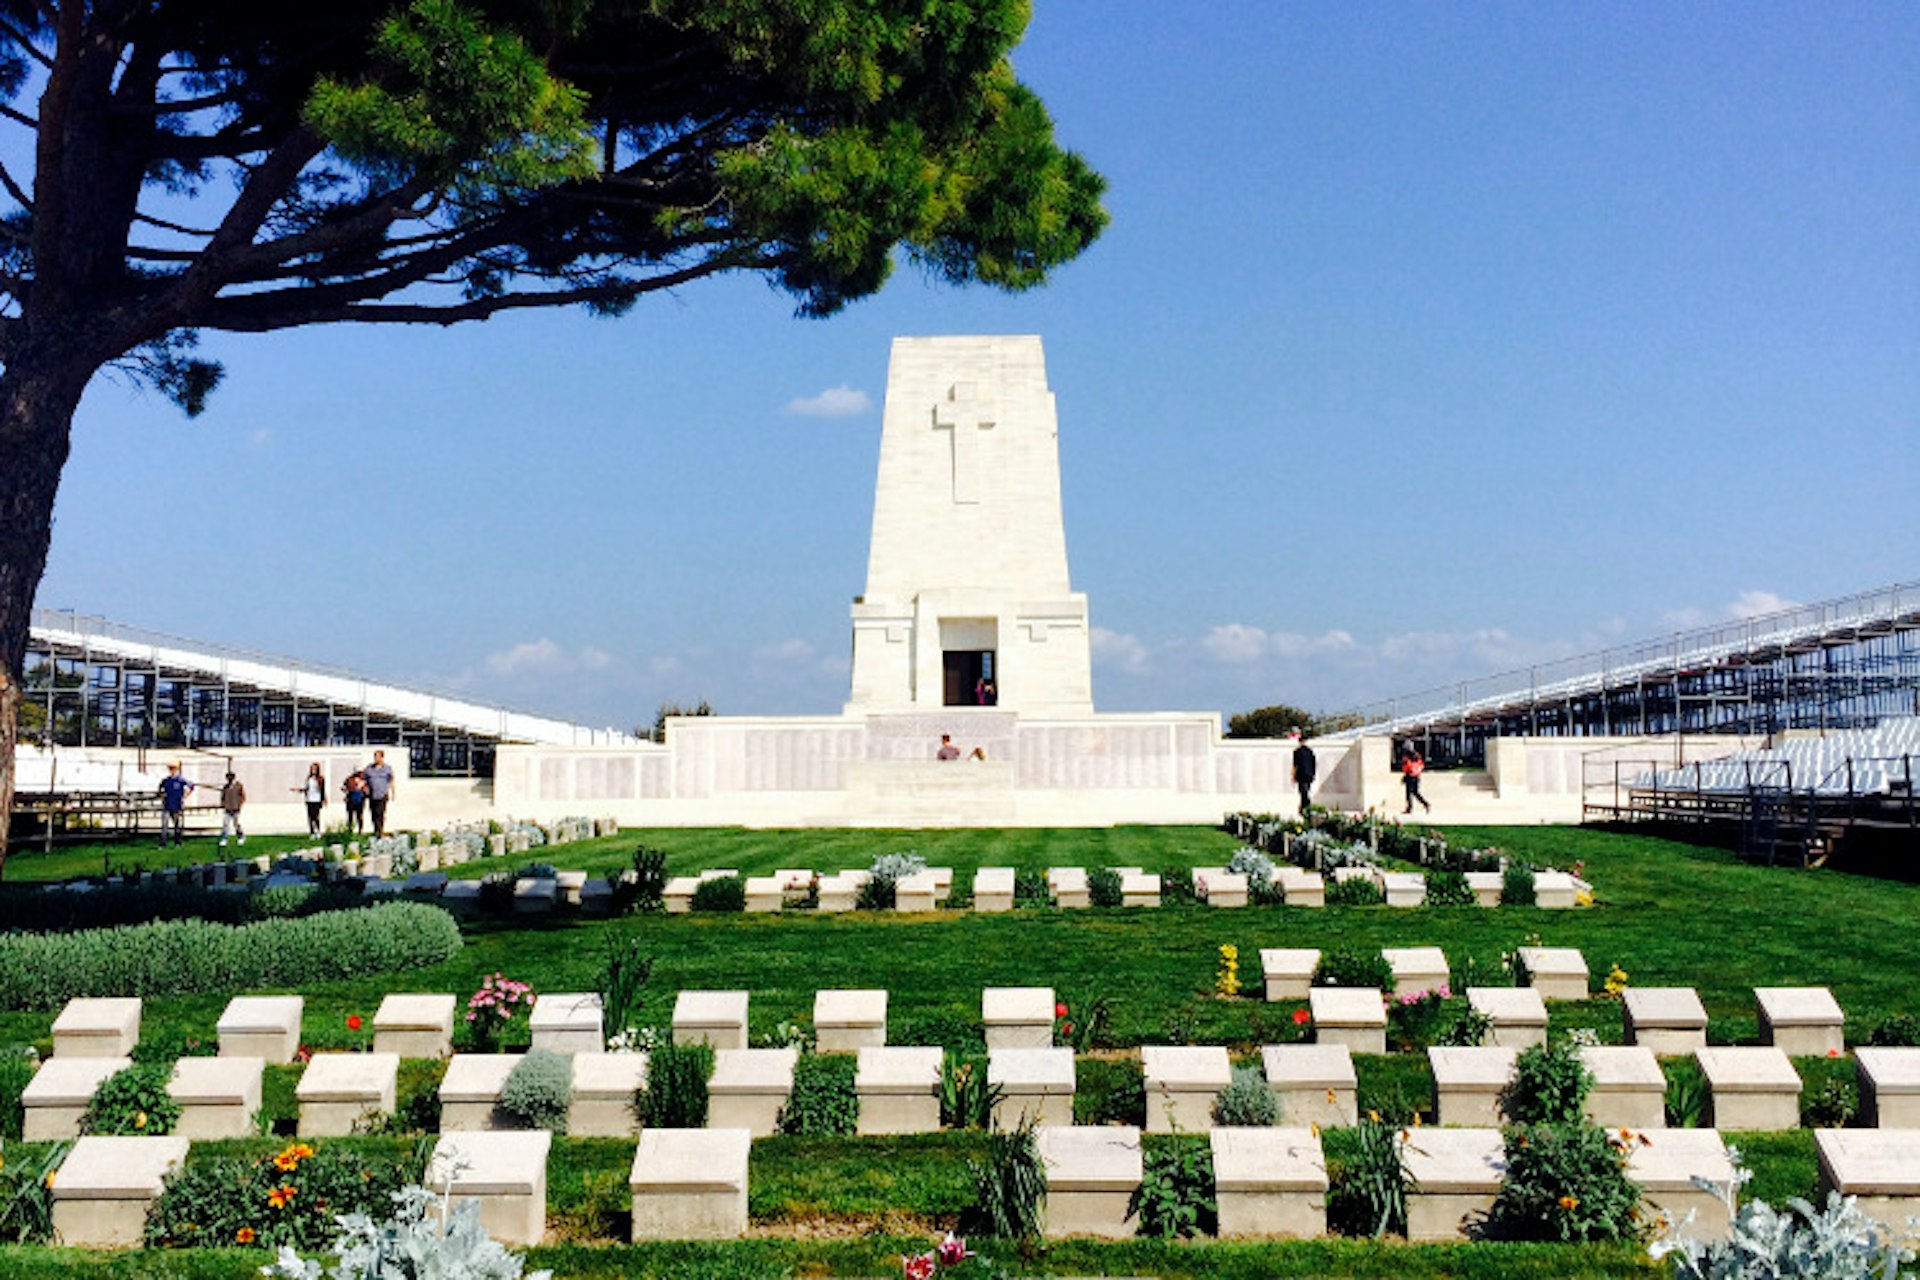 The memorial at Lone Pine, Gallipoli. Image by Virginia Maxwell / Lonely Planet